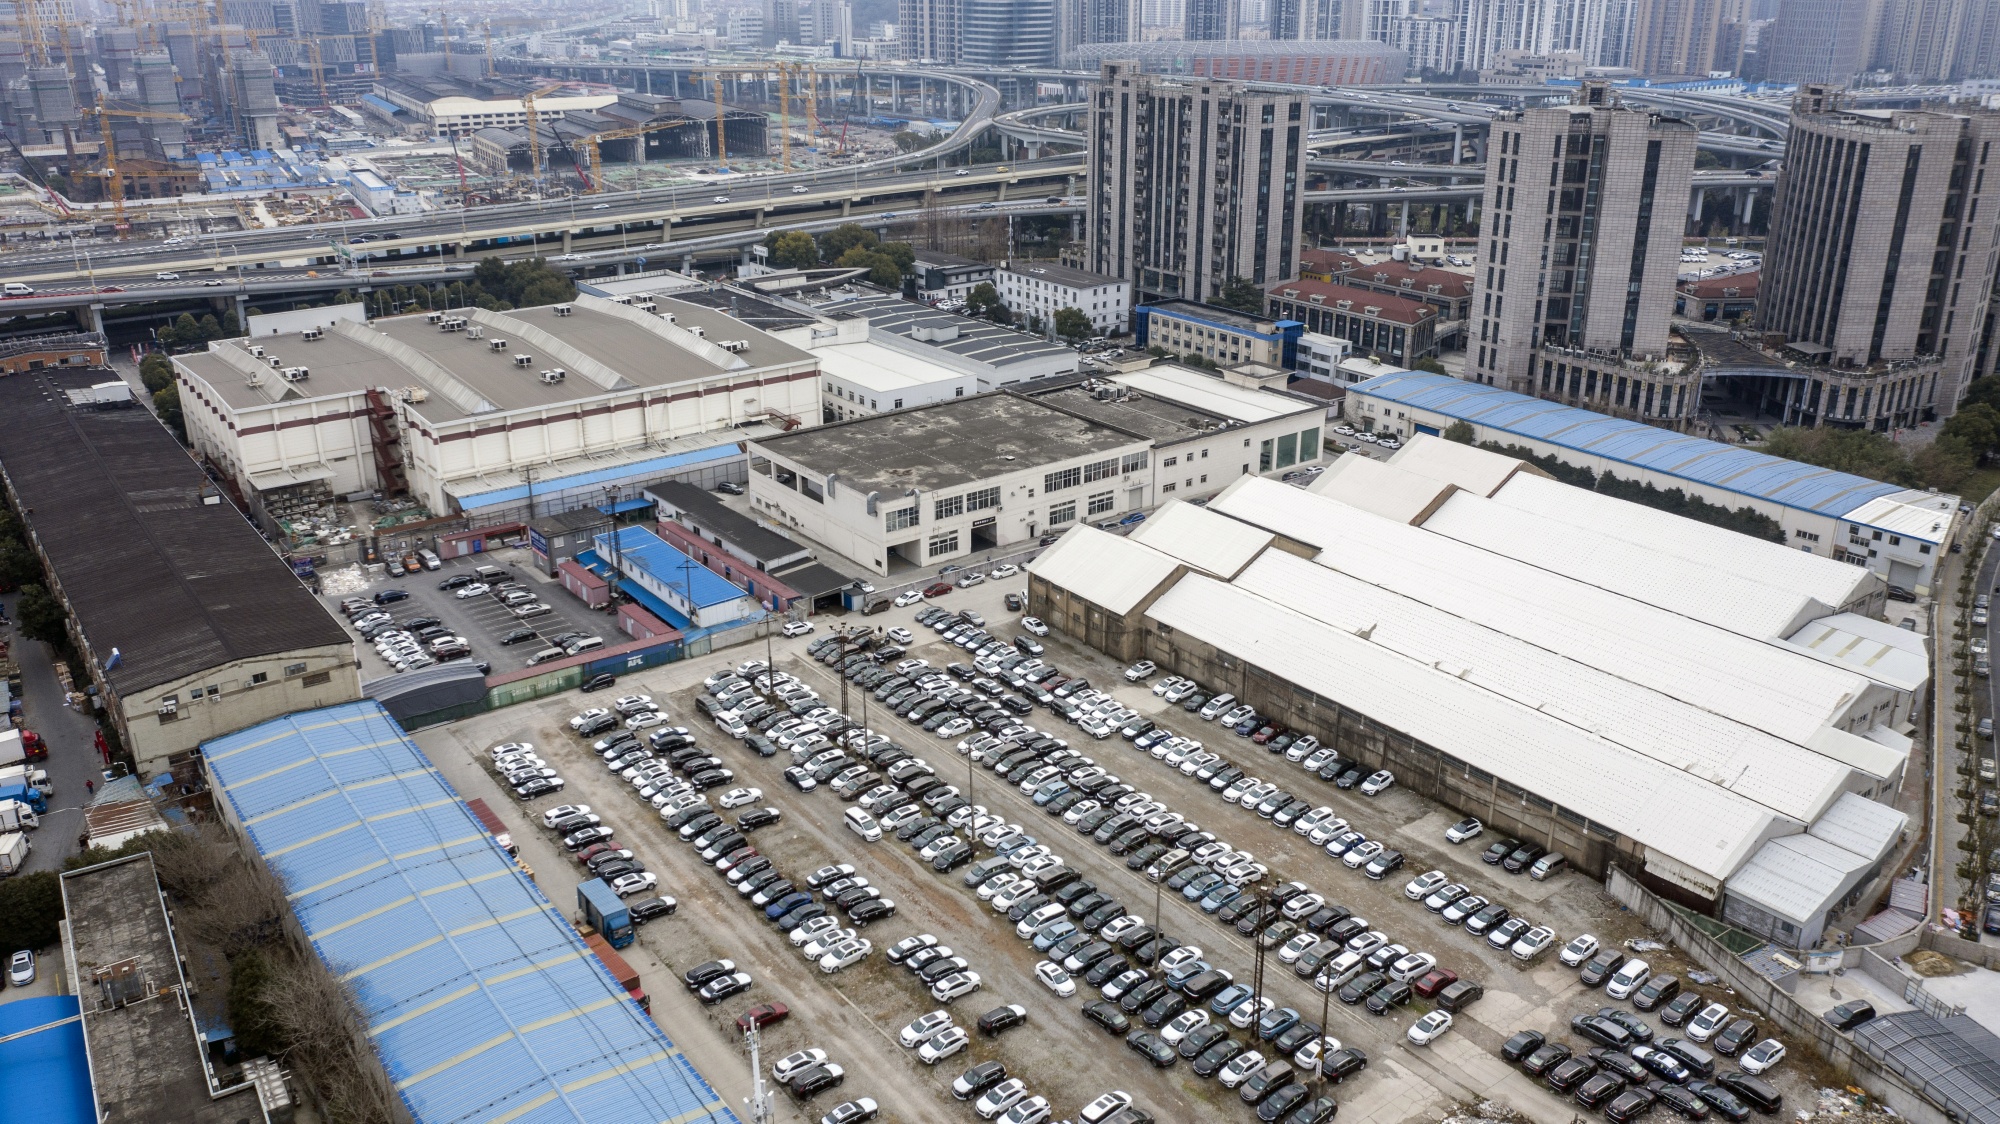 Vehicles at a used-car sales lot in this aerial photograph taken in Shanghai, China.